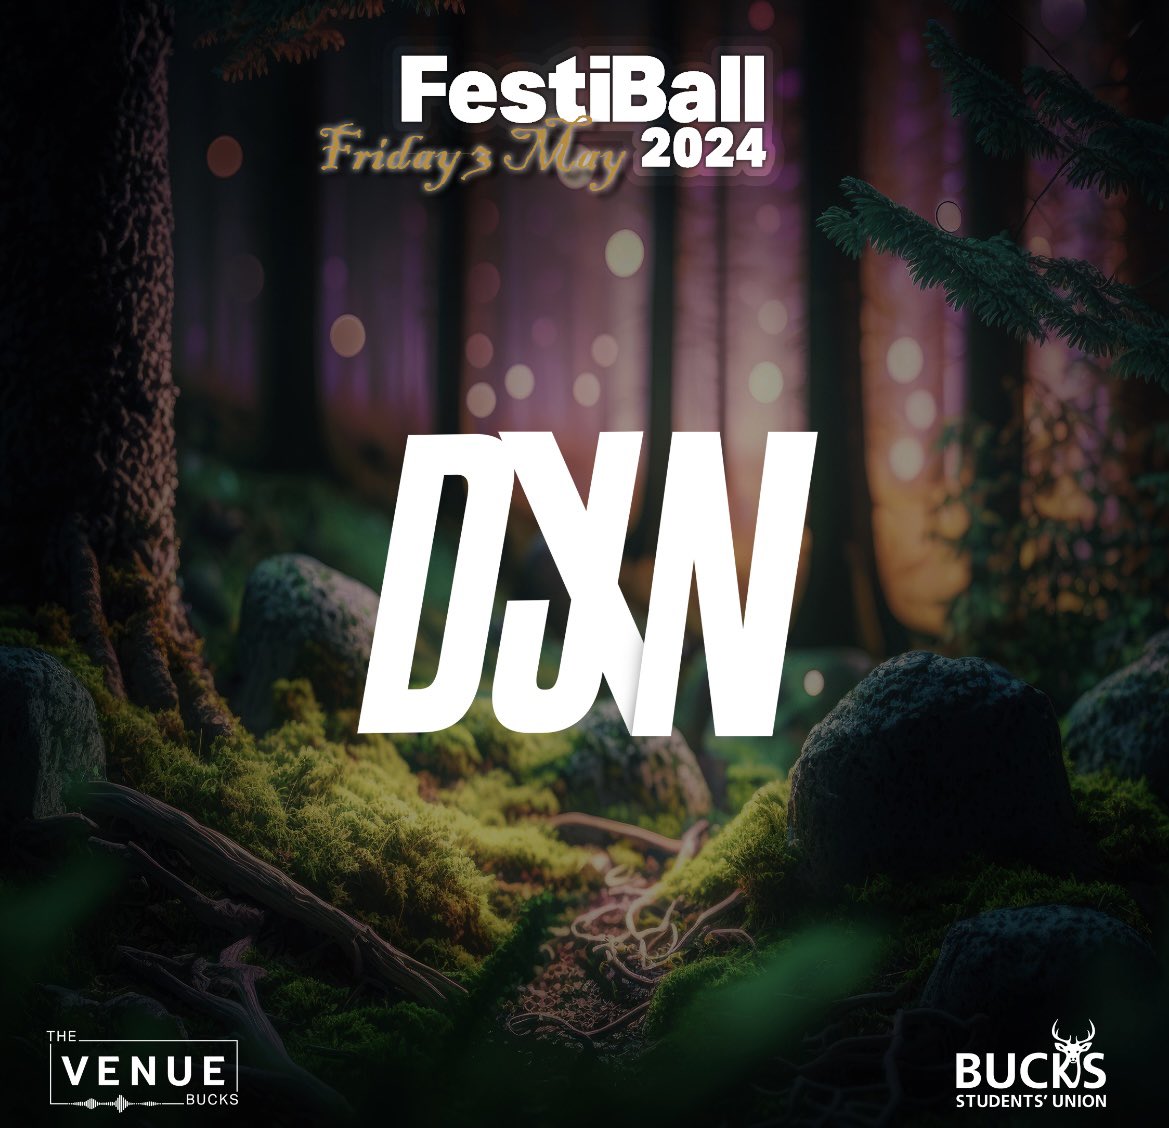 It’s time to announce our penultimate Festiball act!!!! DJ Win will be joining us on the Friday night 😍 The Manchester artist - most well known for being Aitch’s DJ, released his first single ‘Stepped In’ alongside Tana and Marnz🔥 Don’t forget BNU students get free entry!